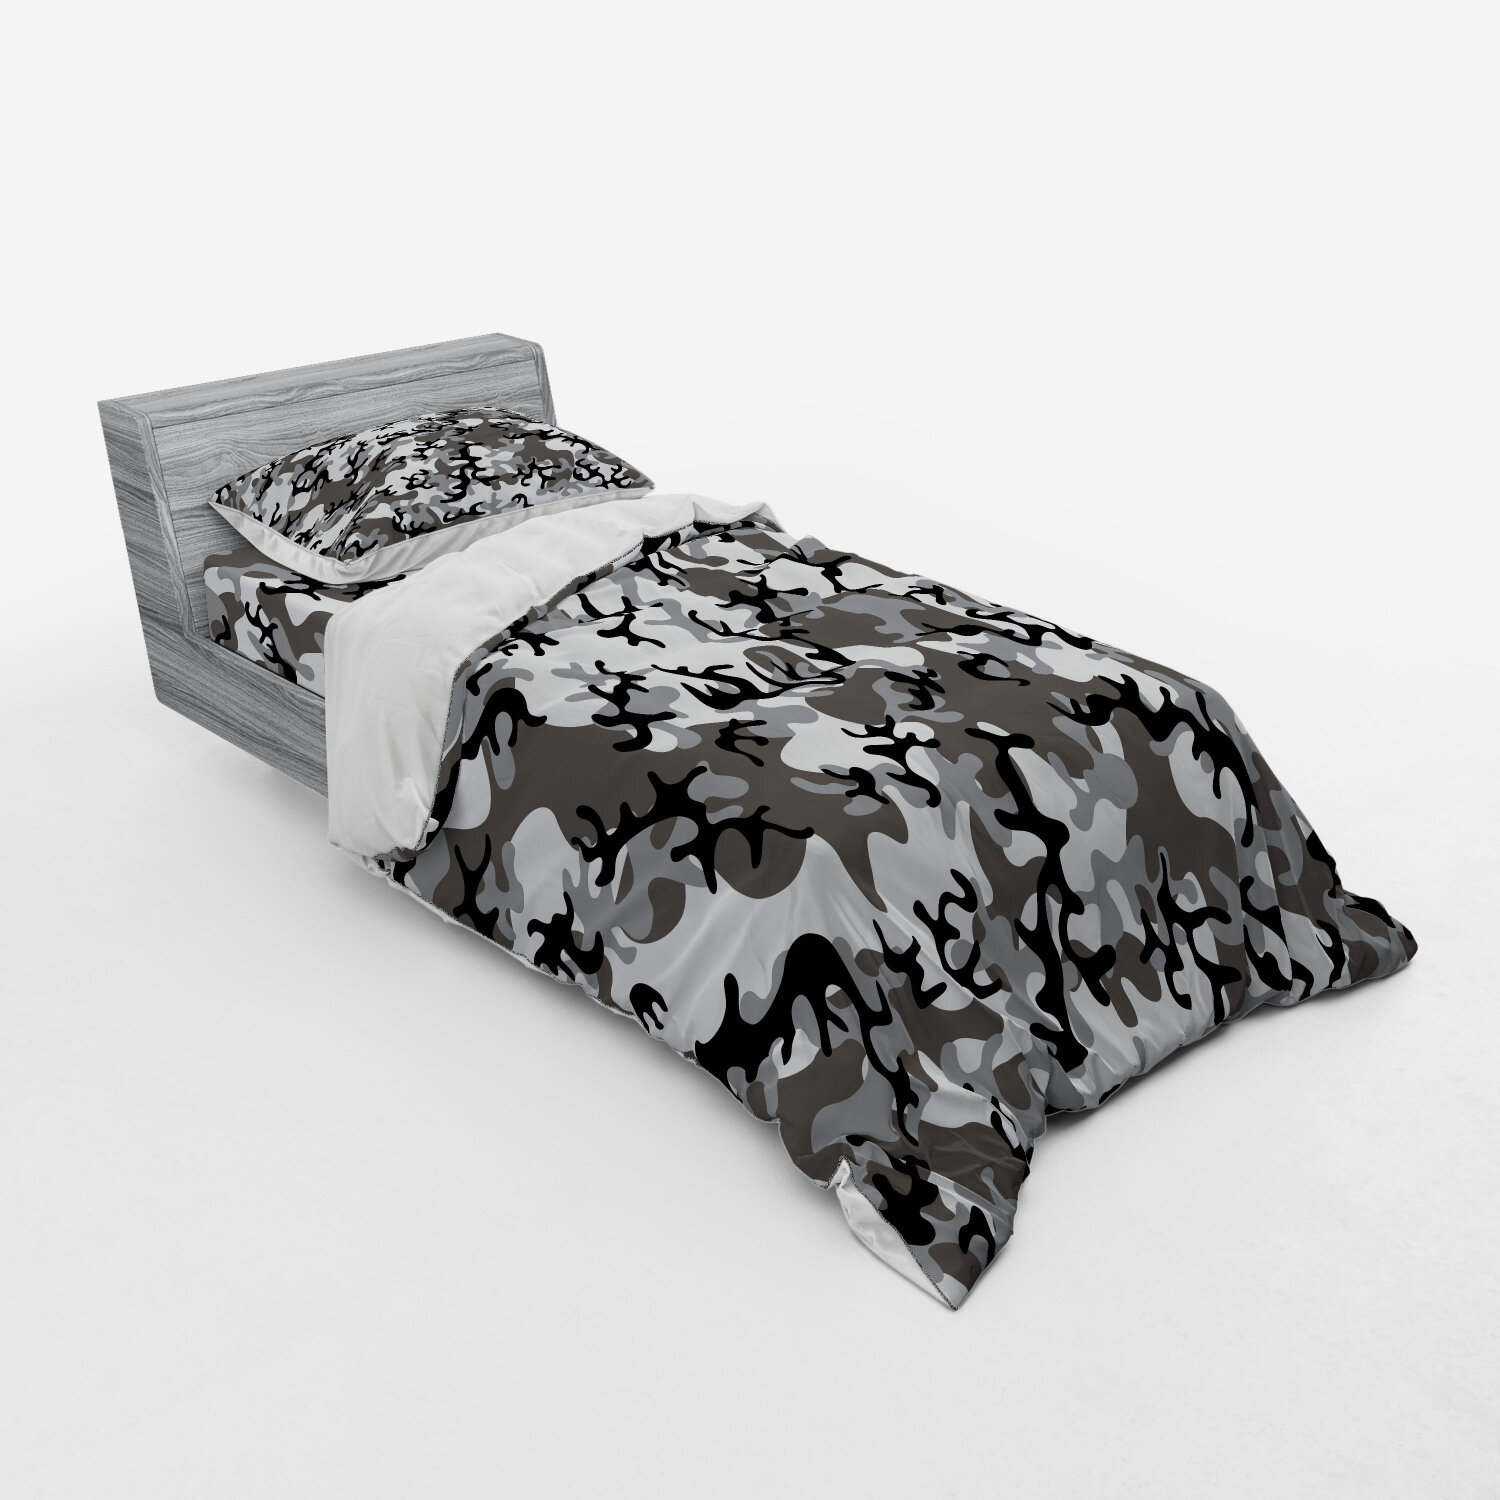 Super King Size Bed Camouflage Black Duvet Cover Set Army Military